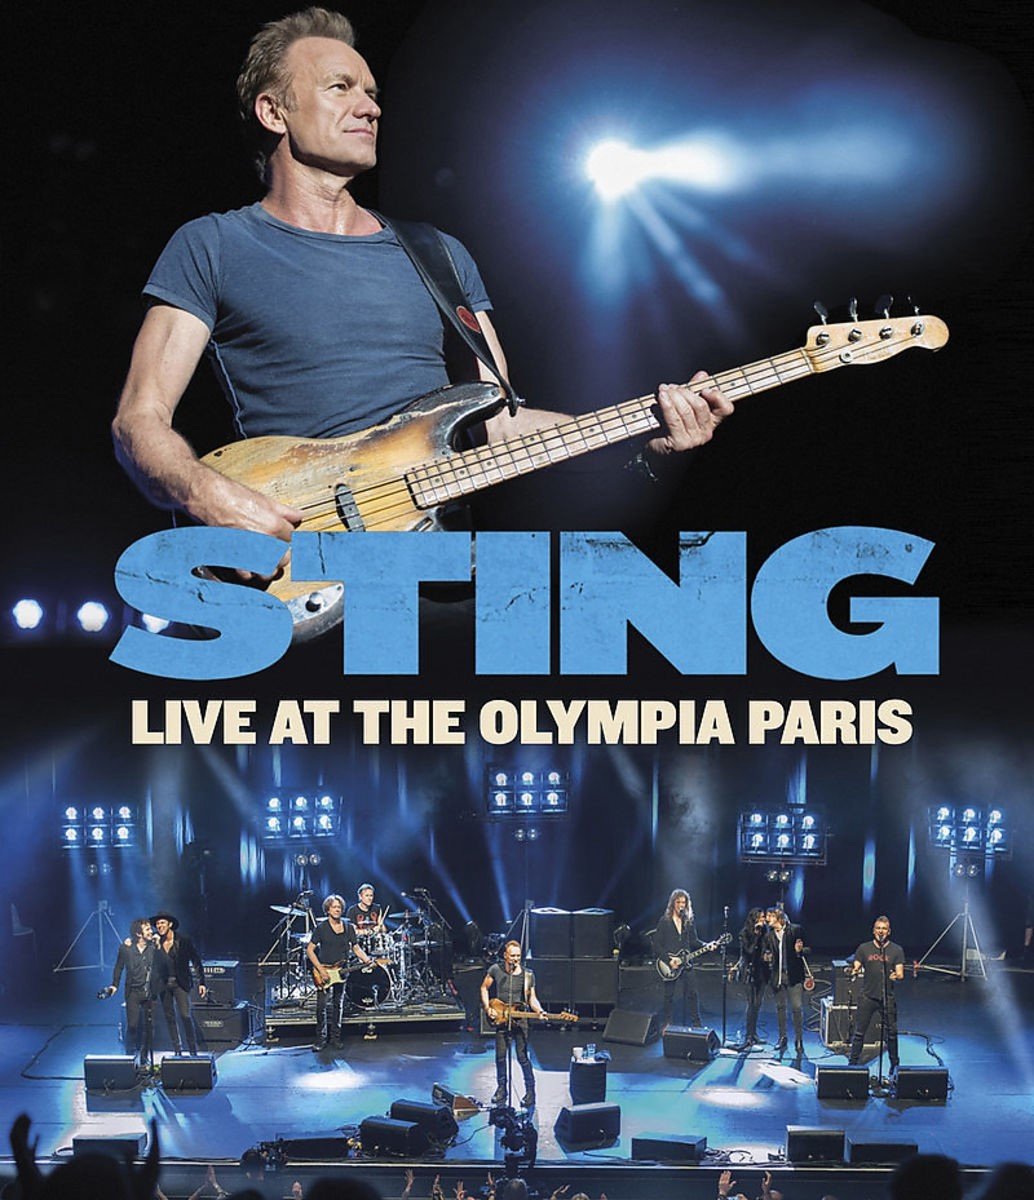 Sting - Live At The Olympia Paris (Blu-ray)